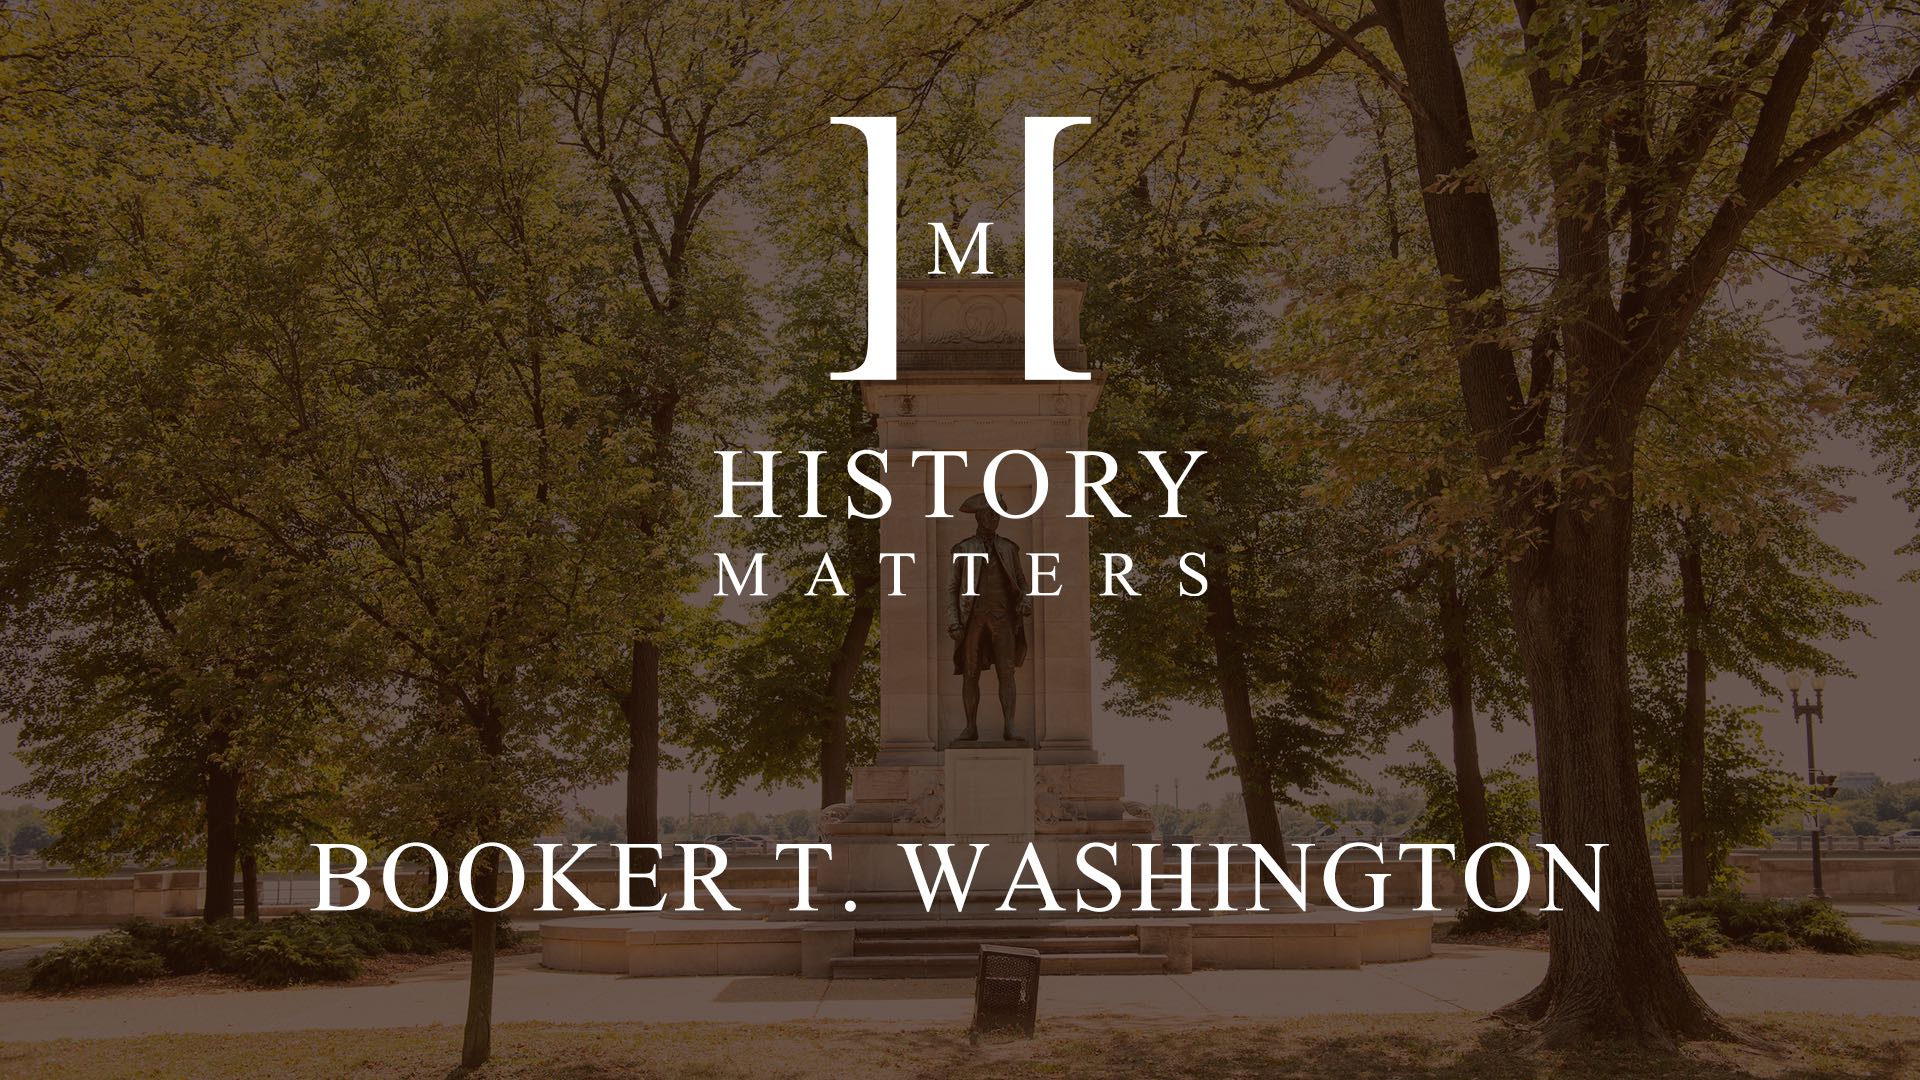 IU C&I Studios Page History Matters Booker T. Washington by Laurie Menekou with background of an old monument in a park